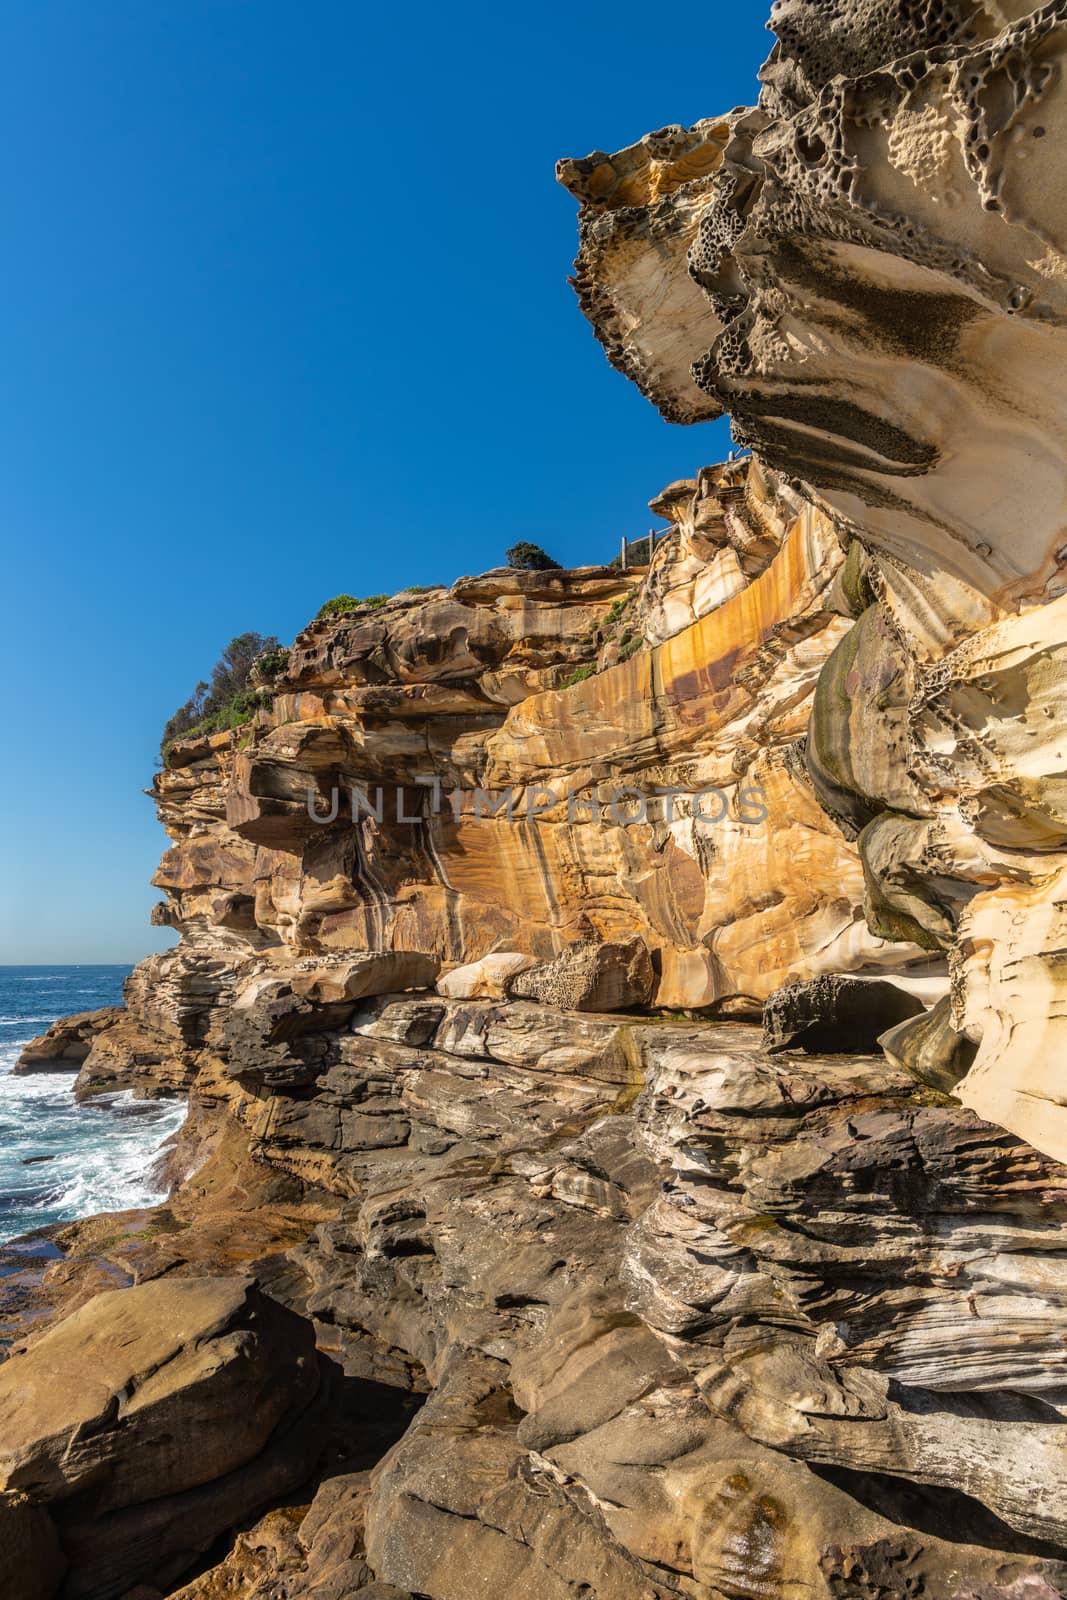 Sydney, Australia - February 11, 2019: Spectacular rock outcrop at Bronte Beach South cliffs, made by erosion.. Yellows and browns under blue sky. Sponge-like borders of shell like plates sticking out.